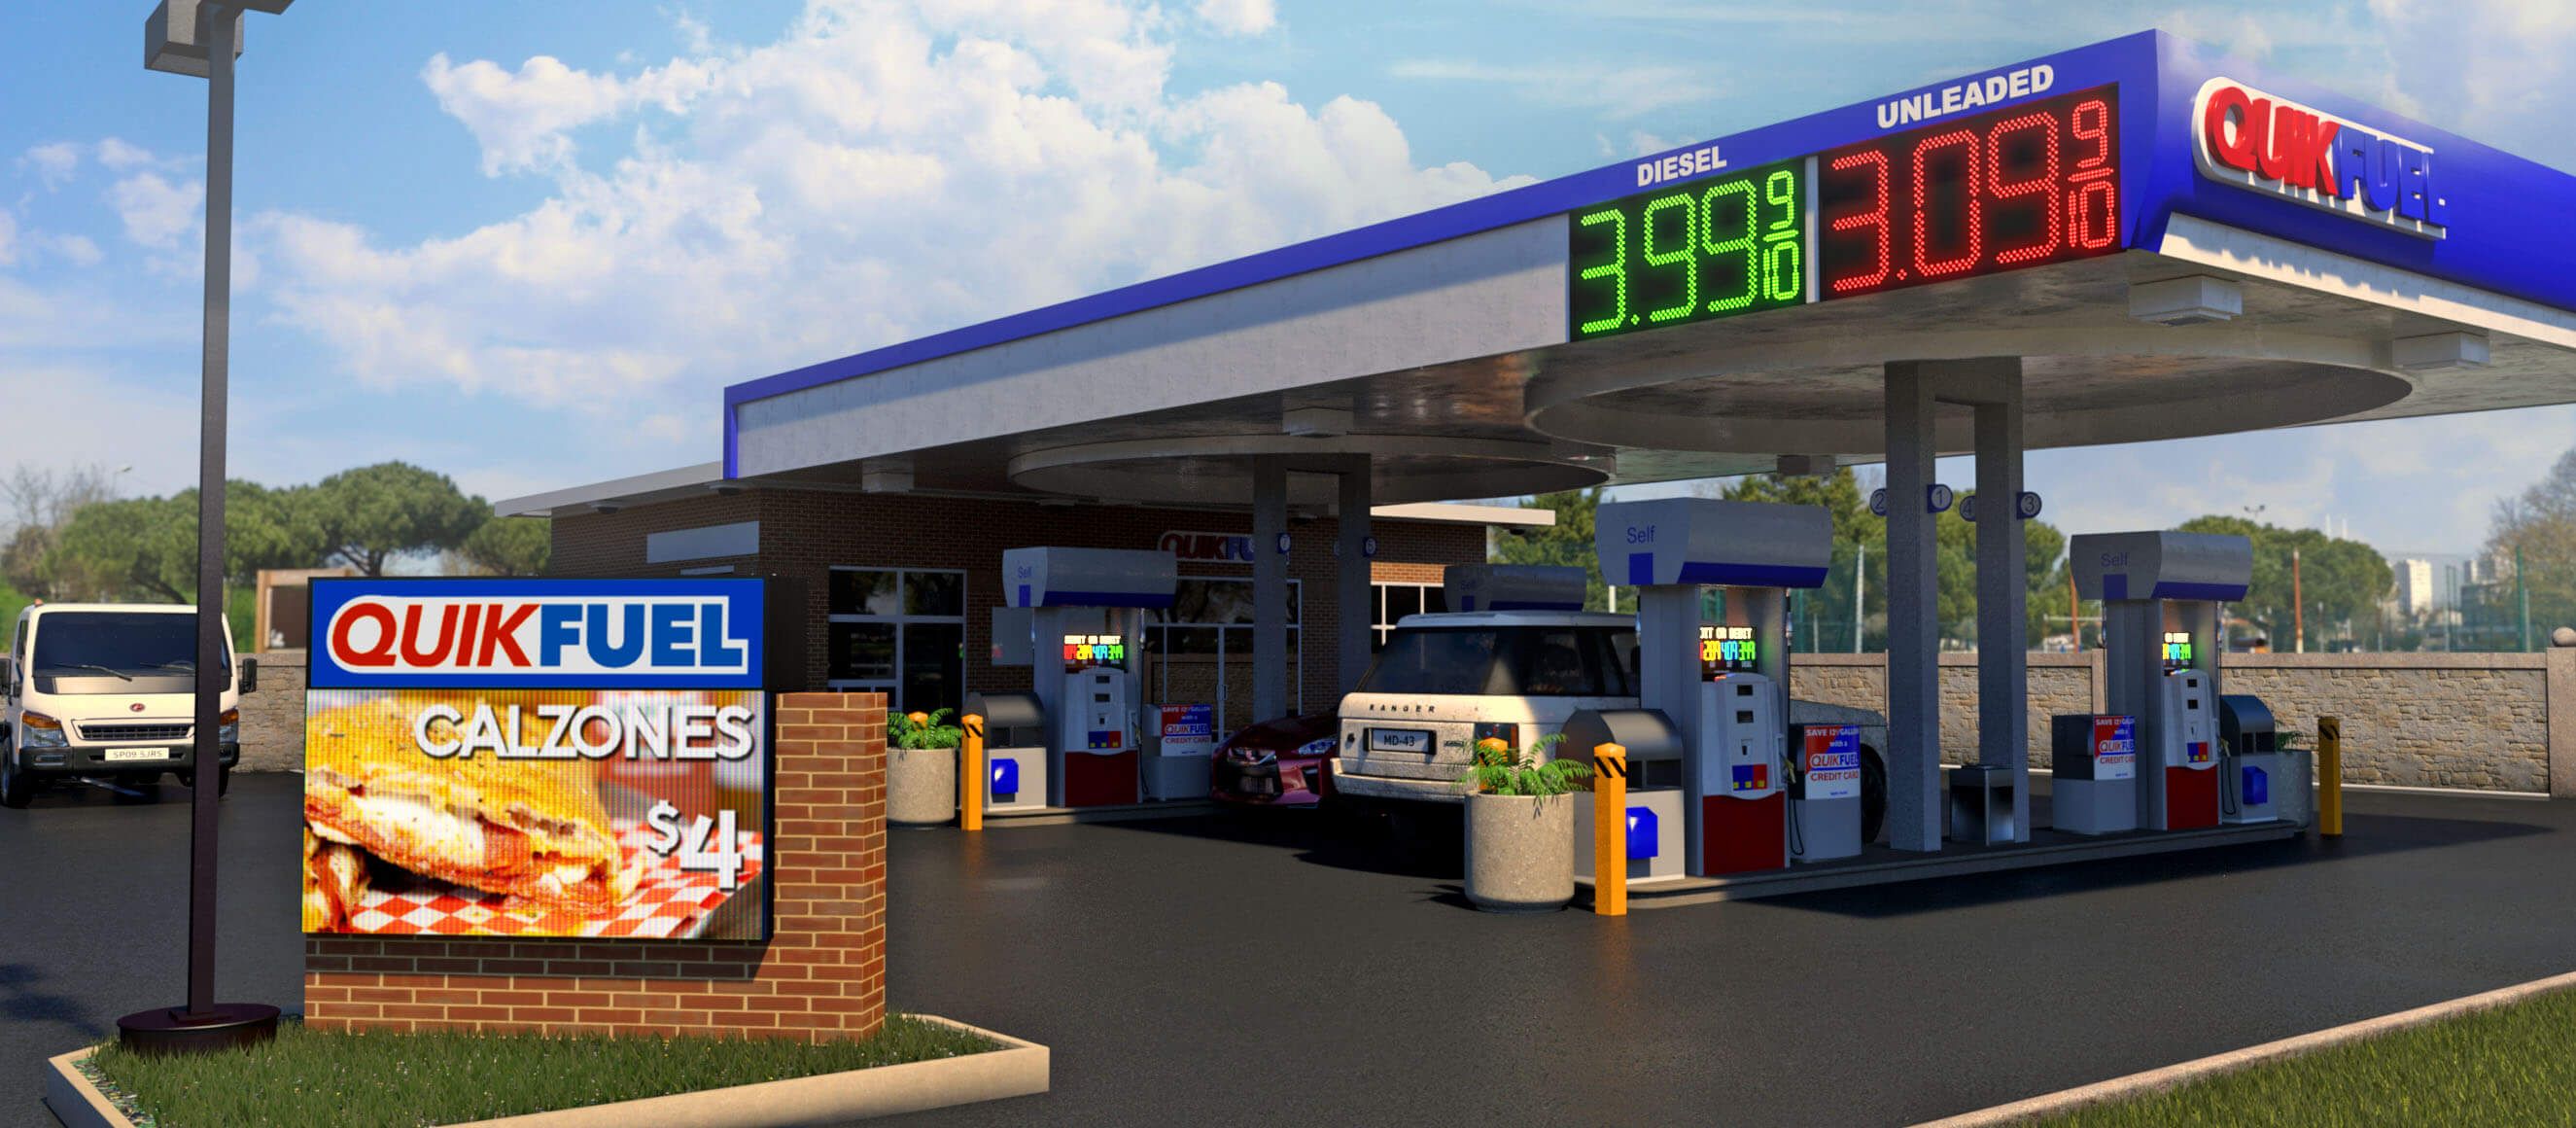 Gas Price and Full-Color LED Displays by Numeritex Displays